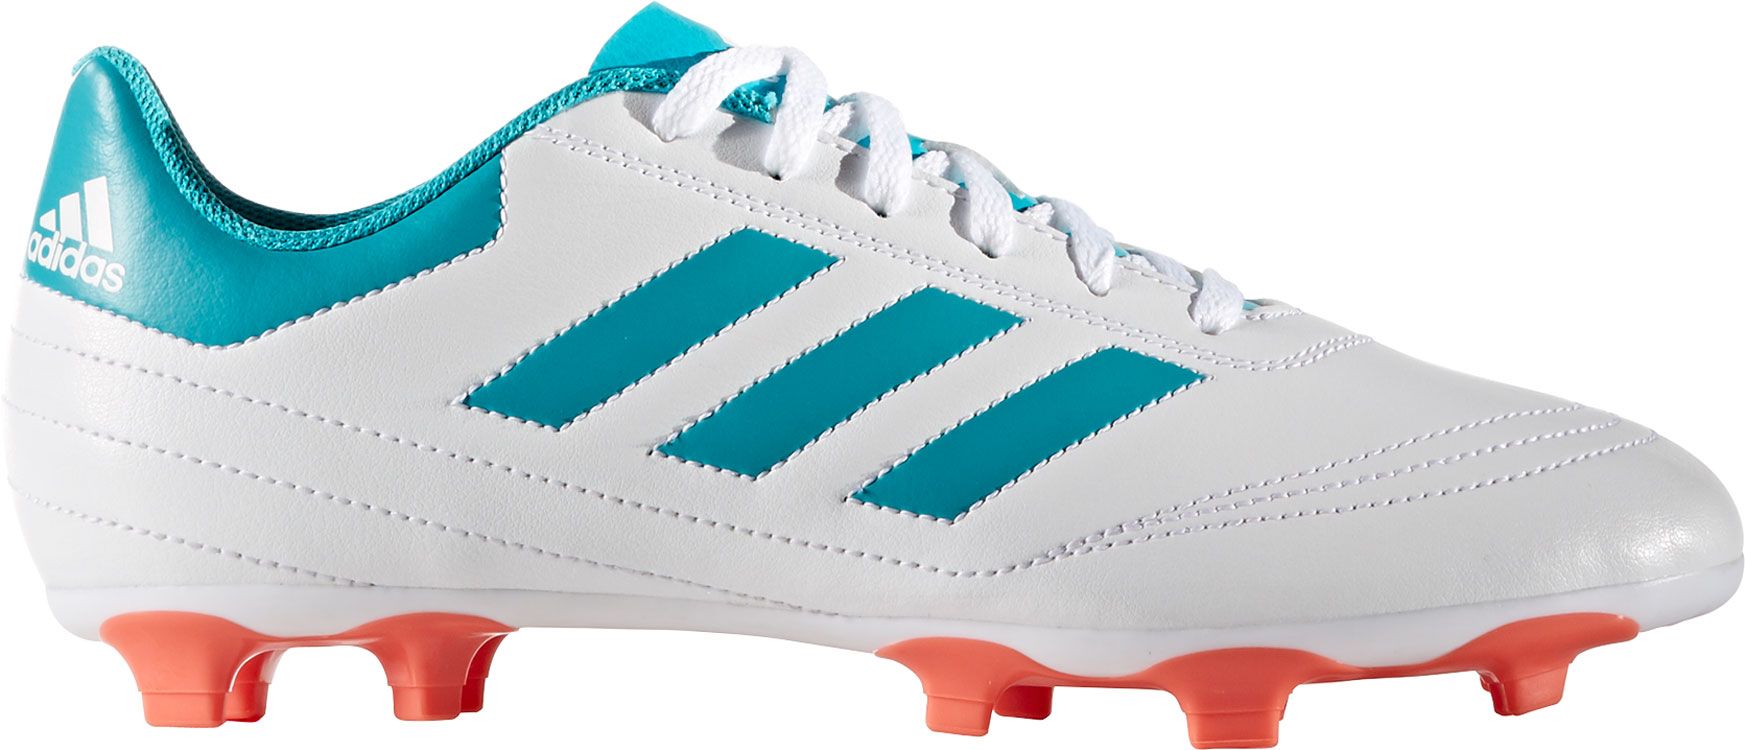 white and blue adidas soccer cleats